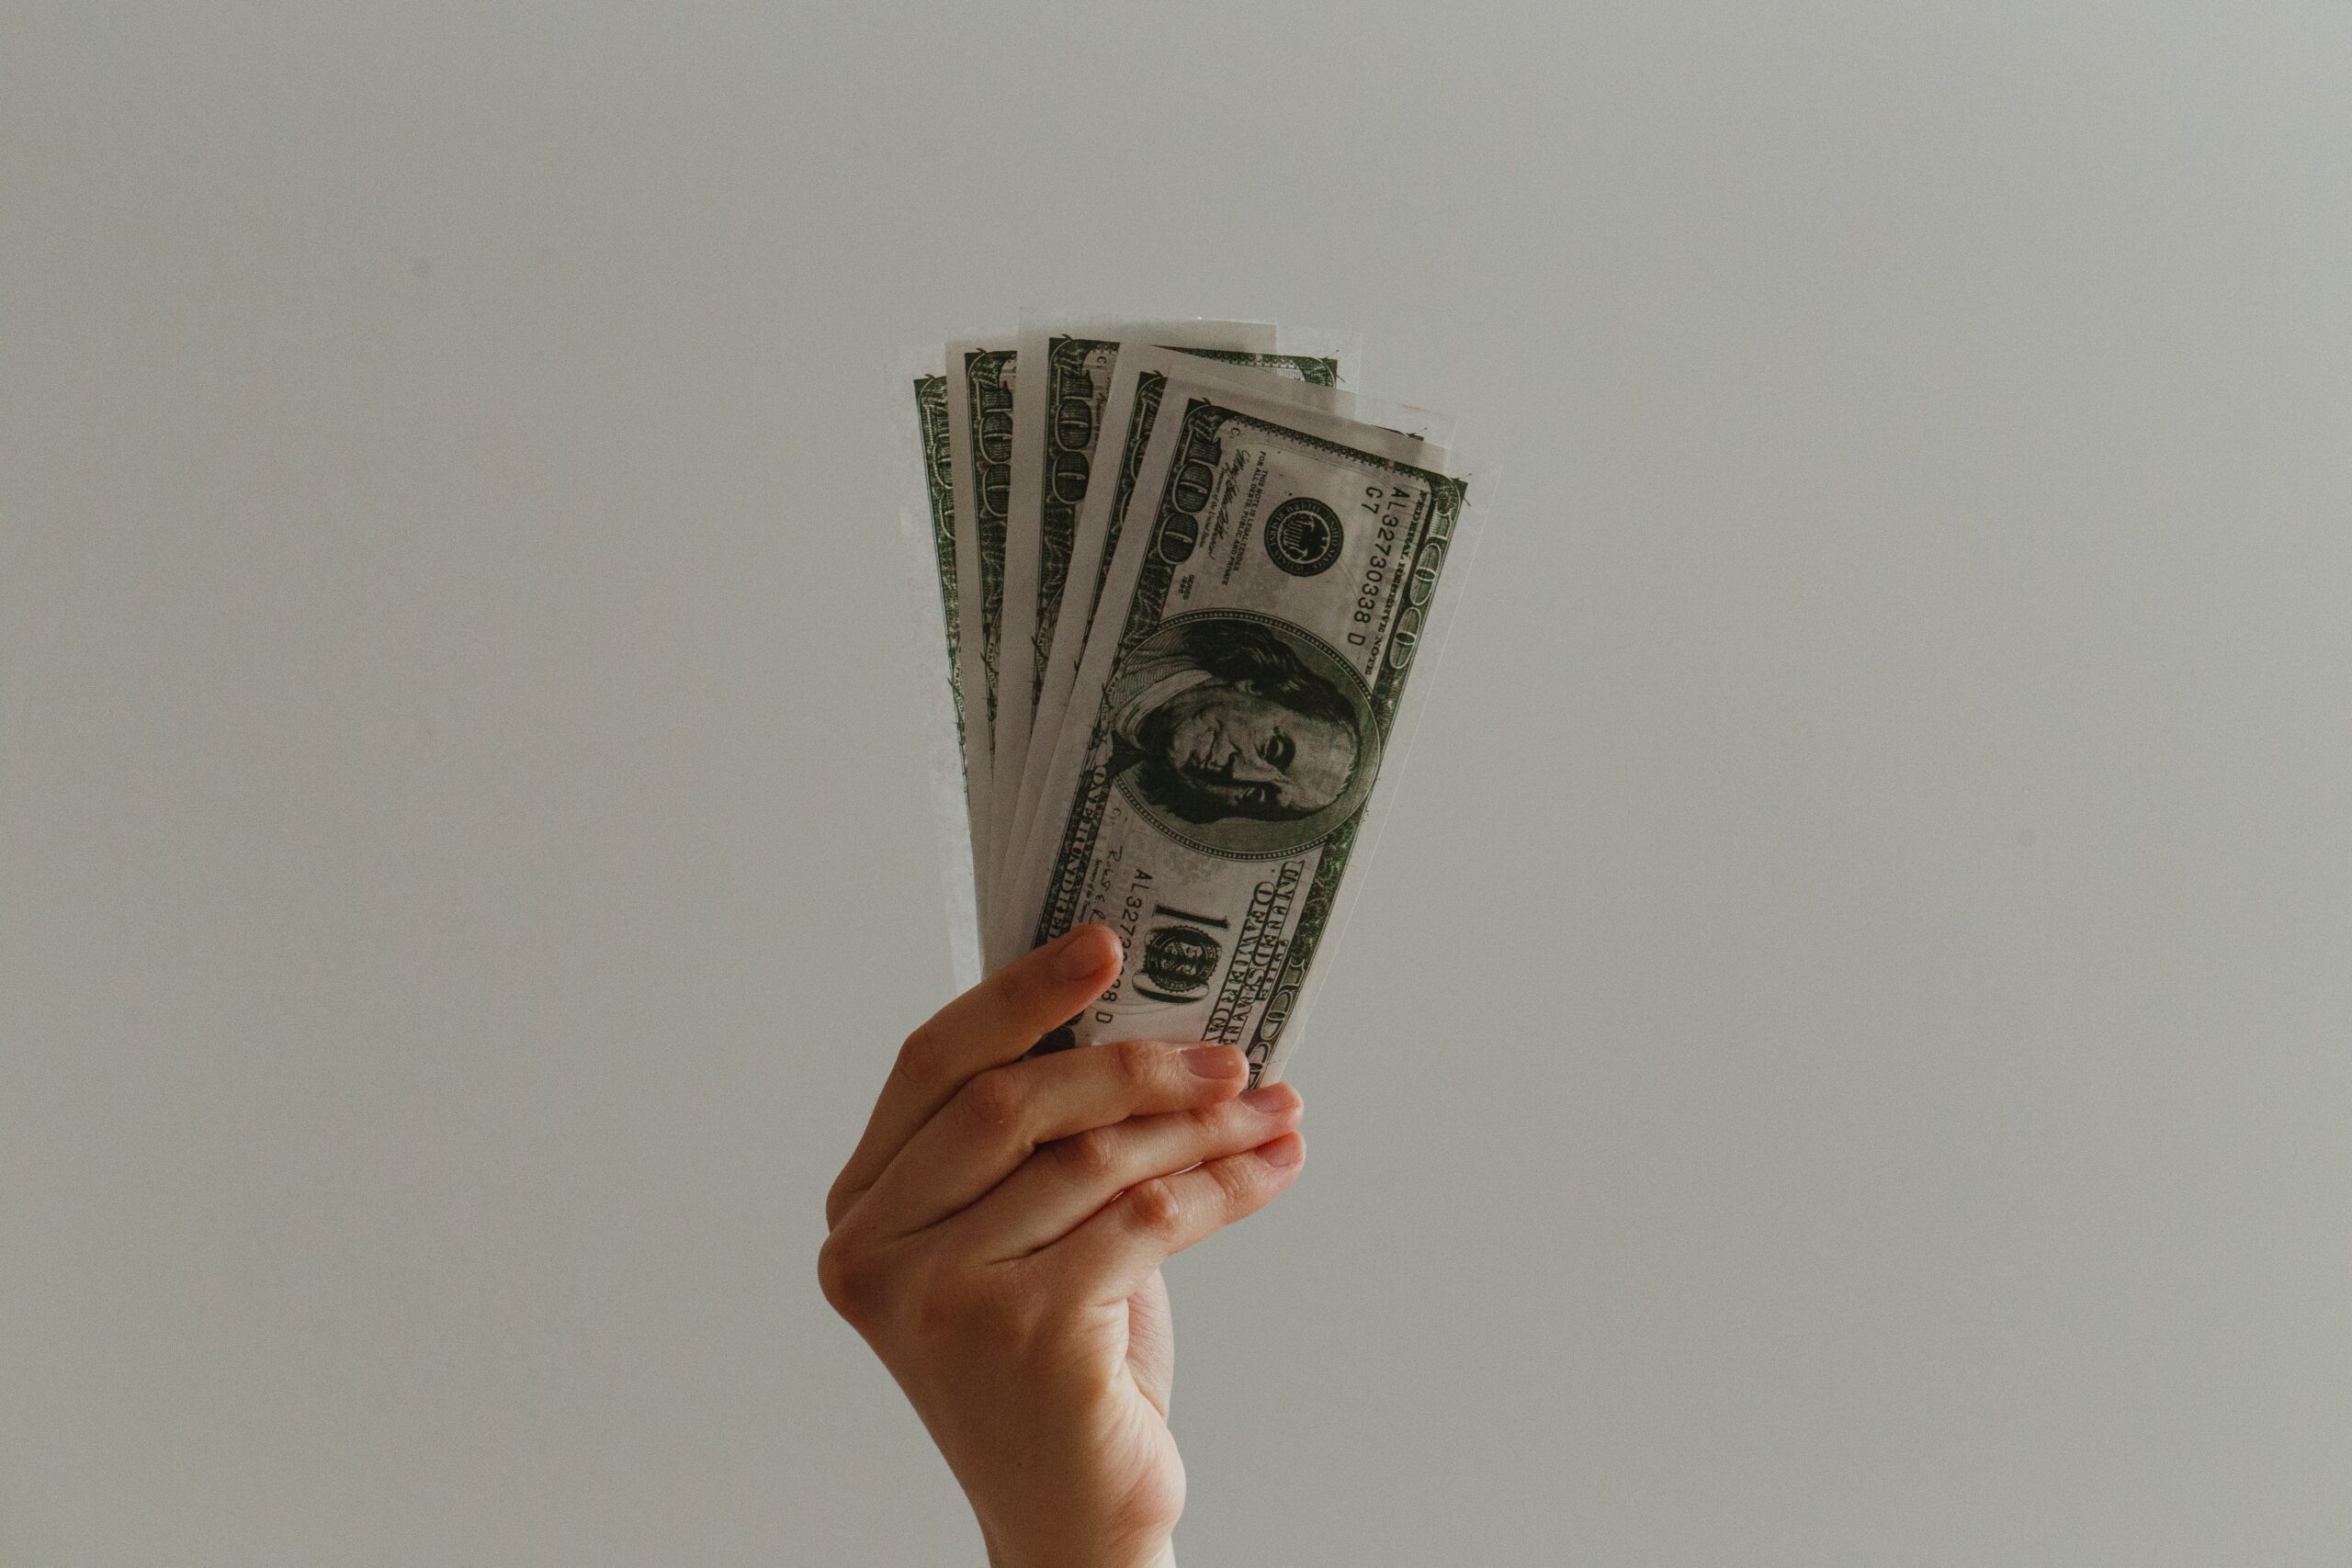 An image of a hand holding up hundred dollar bills. Photo by Jp Valery on Unsplash.